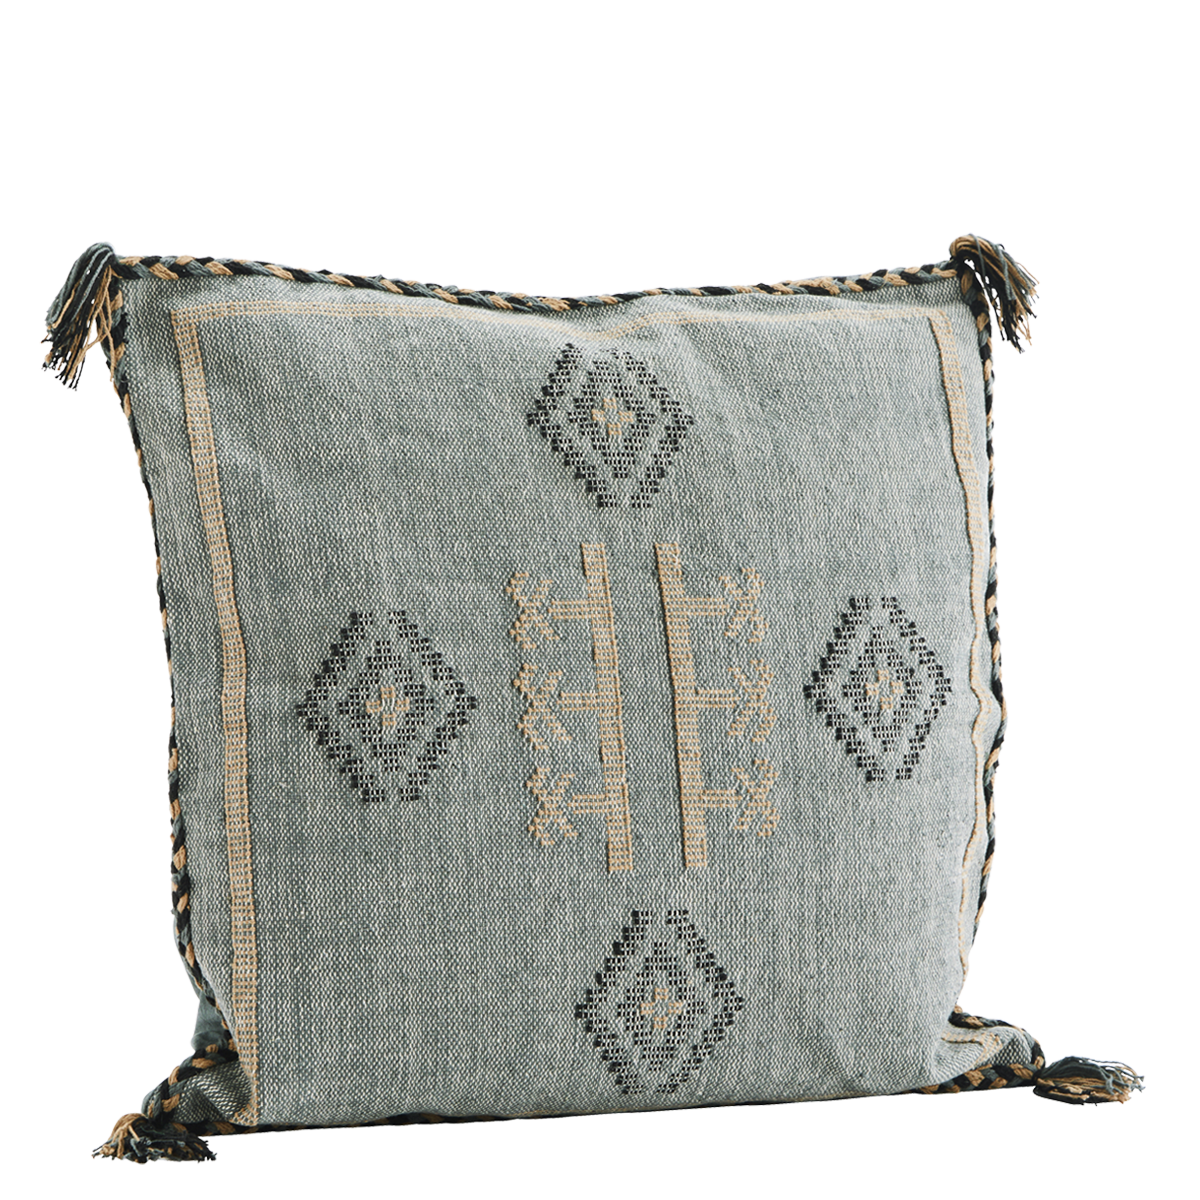 Handwoven cushion cover